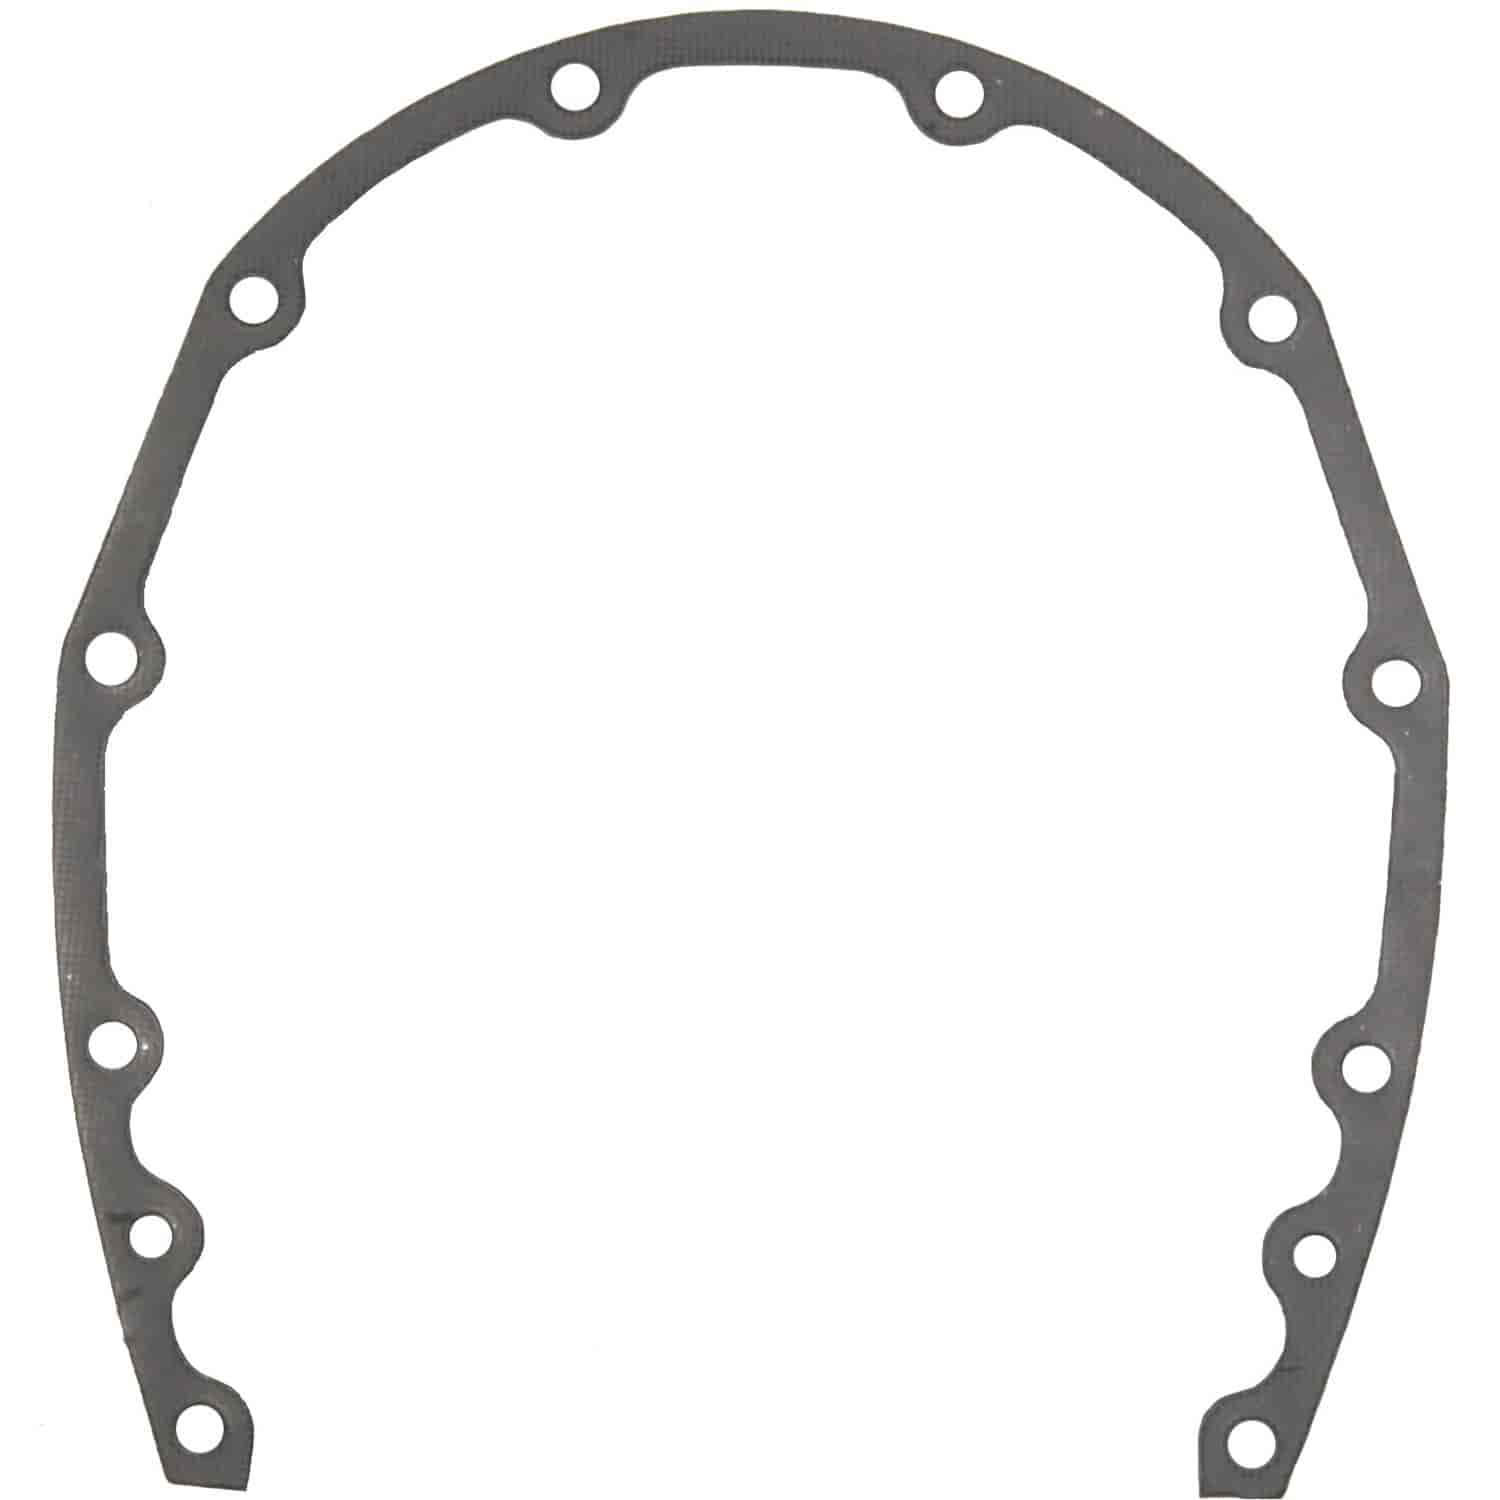 Timing Cover Gasket Bui 350 71-81 92-93  Cad 305 91-92 350 80  Chev 200 78-79 229 80-84 262